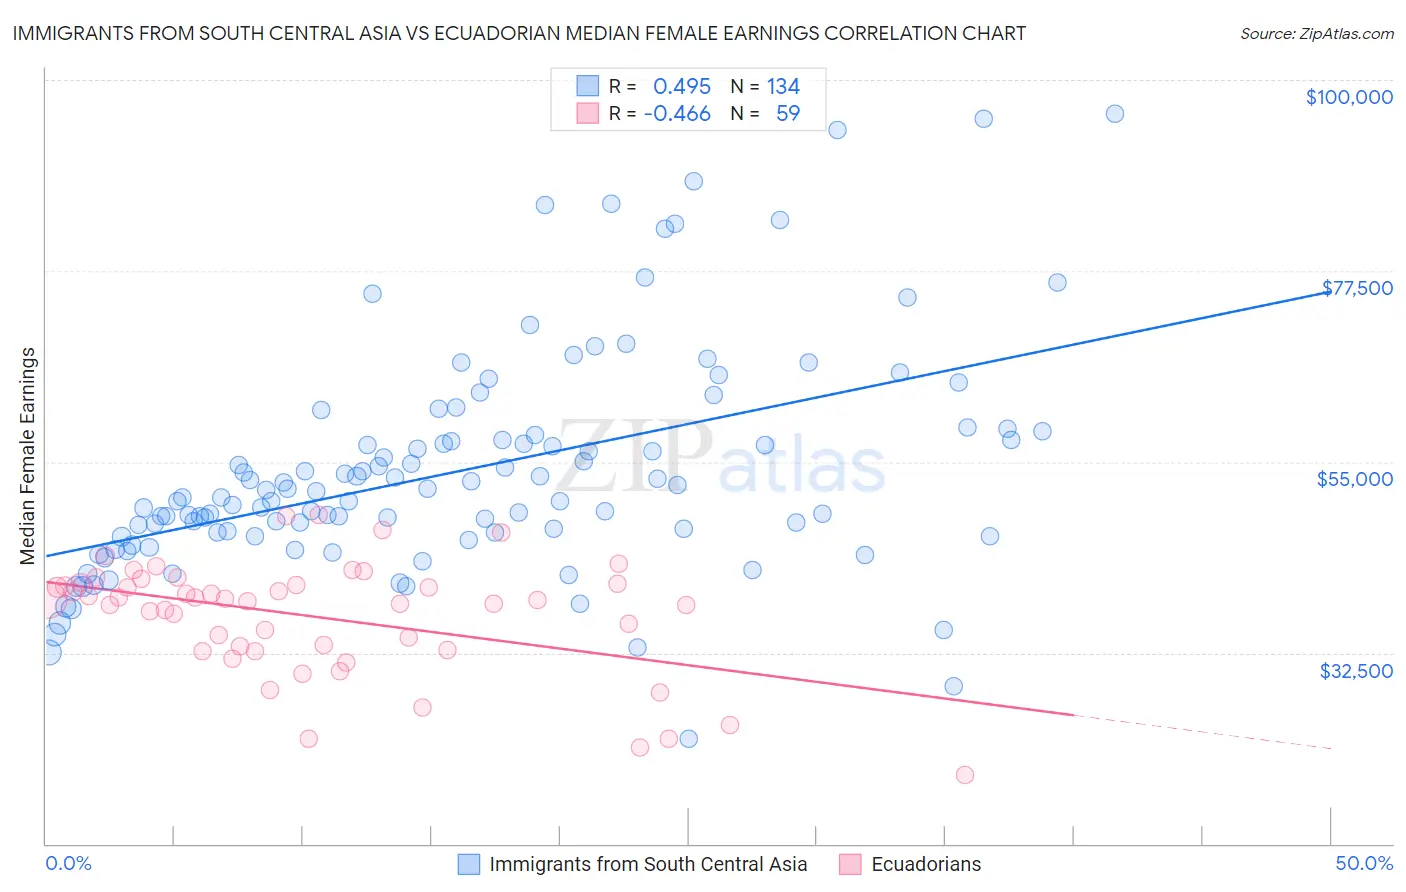 Immigrants from South Central Asia vs Ecuadorian Median Female Earnings